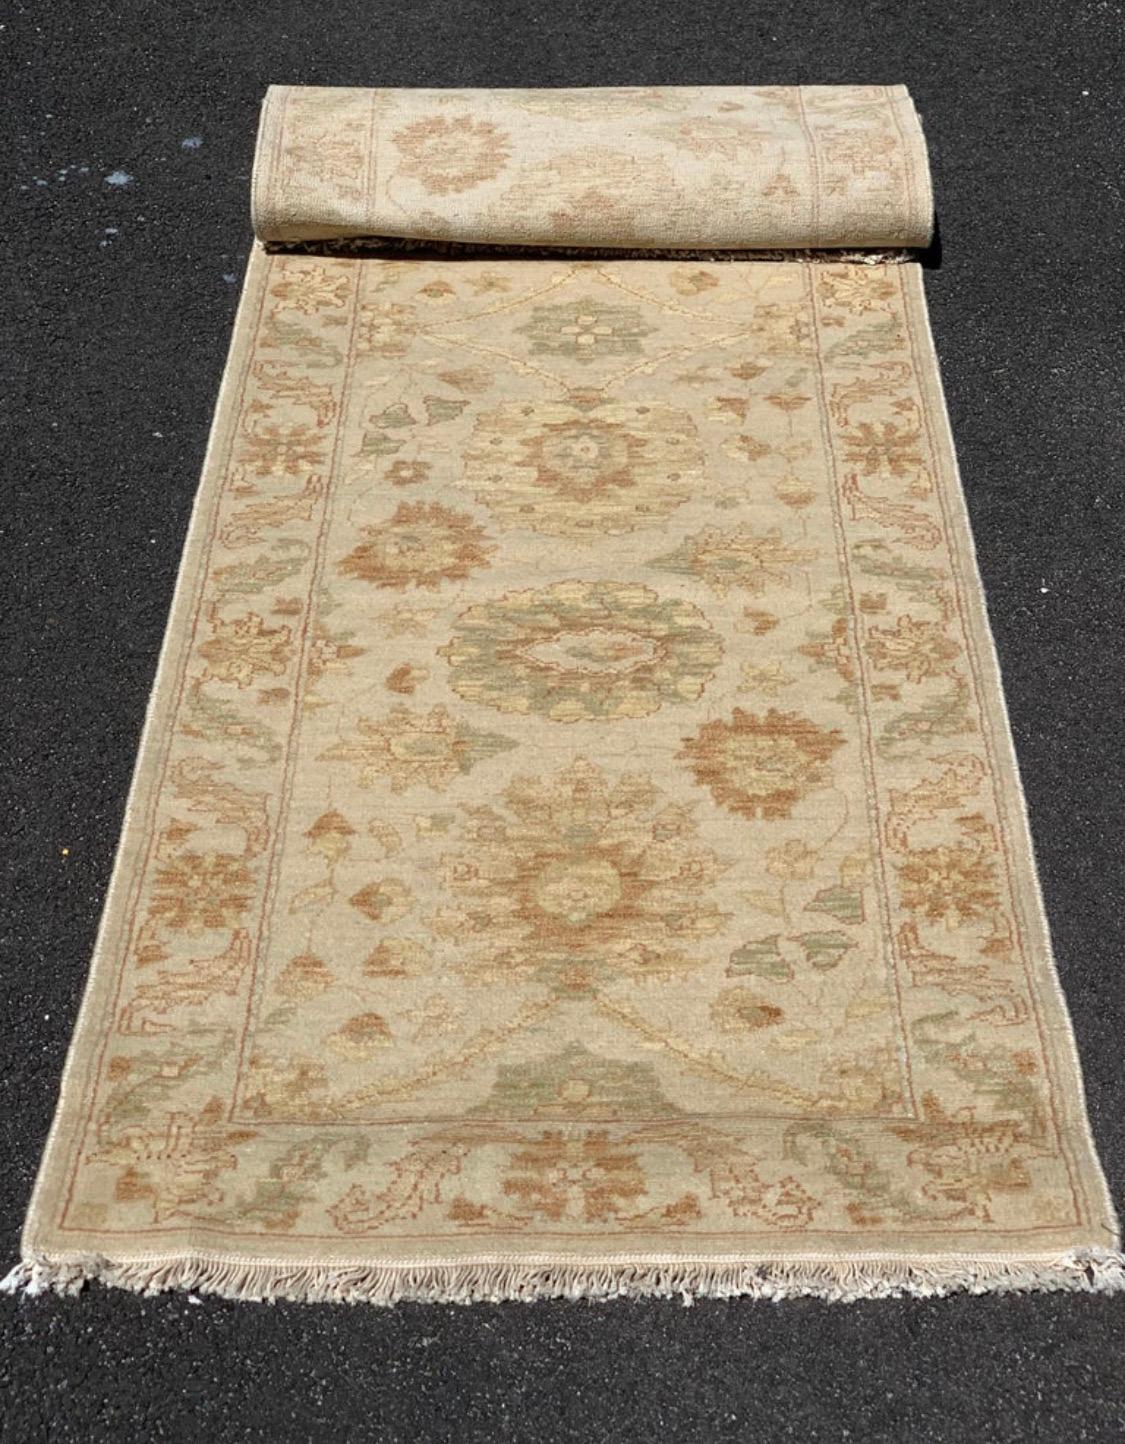 This is a new late 20th century long and narrow beige ivory floral Persian style runner rug handwoven in Alexandria, Egypt in 1990s. We manufactured these rugs and the design and colors were hand chosen by us and we have a wide variety of sizes in